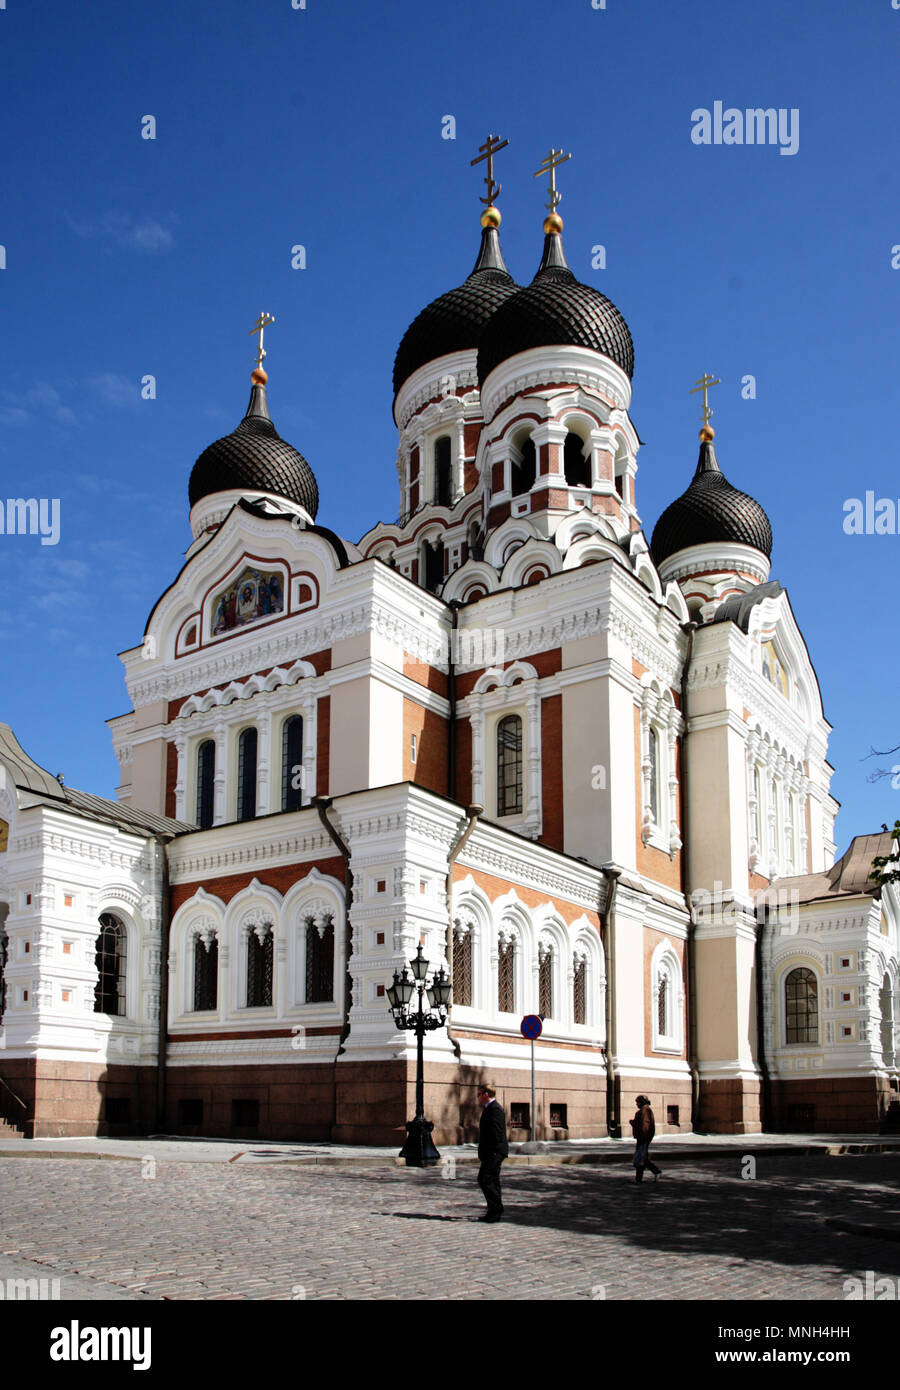 Tallinn, Estonia -  May 23, 2008: The Alexander Nevsky Cathedral is an orthodox cathedral in Old Town, Tallinn, Estonia. The Alexander Nevsky Cathedra Stock Photo